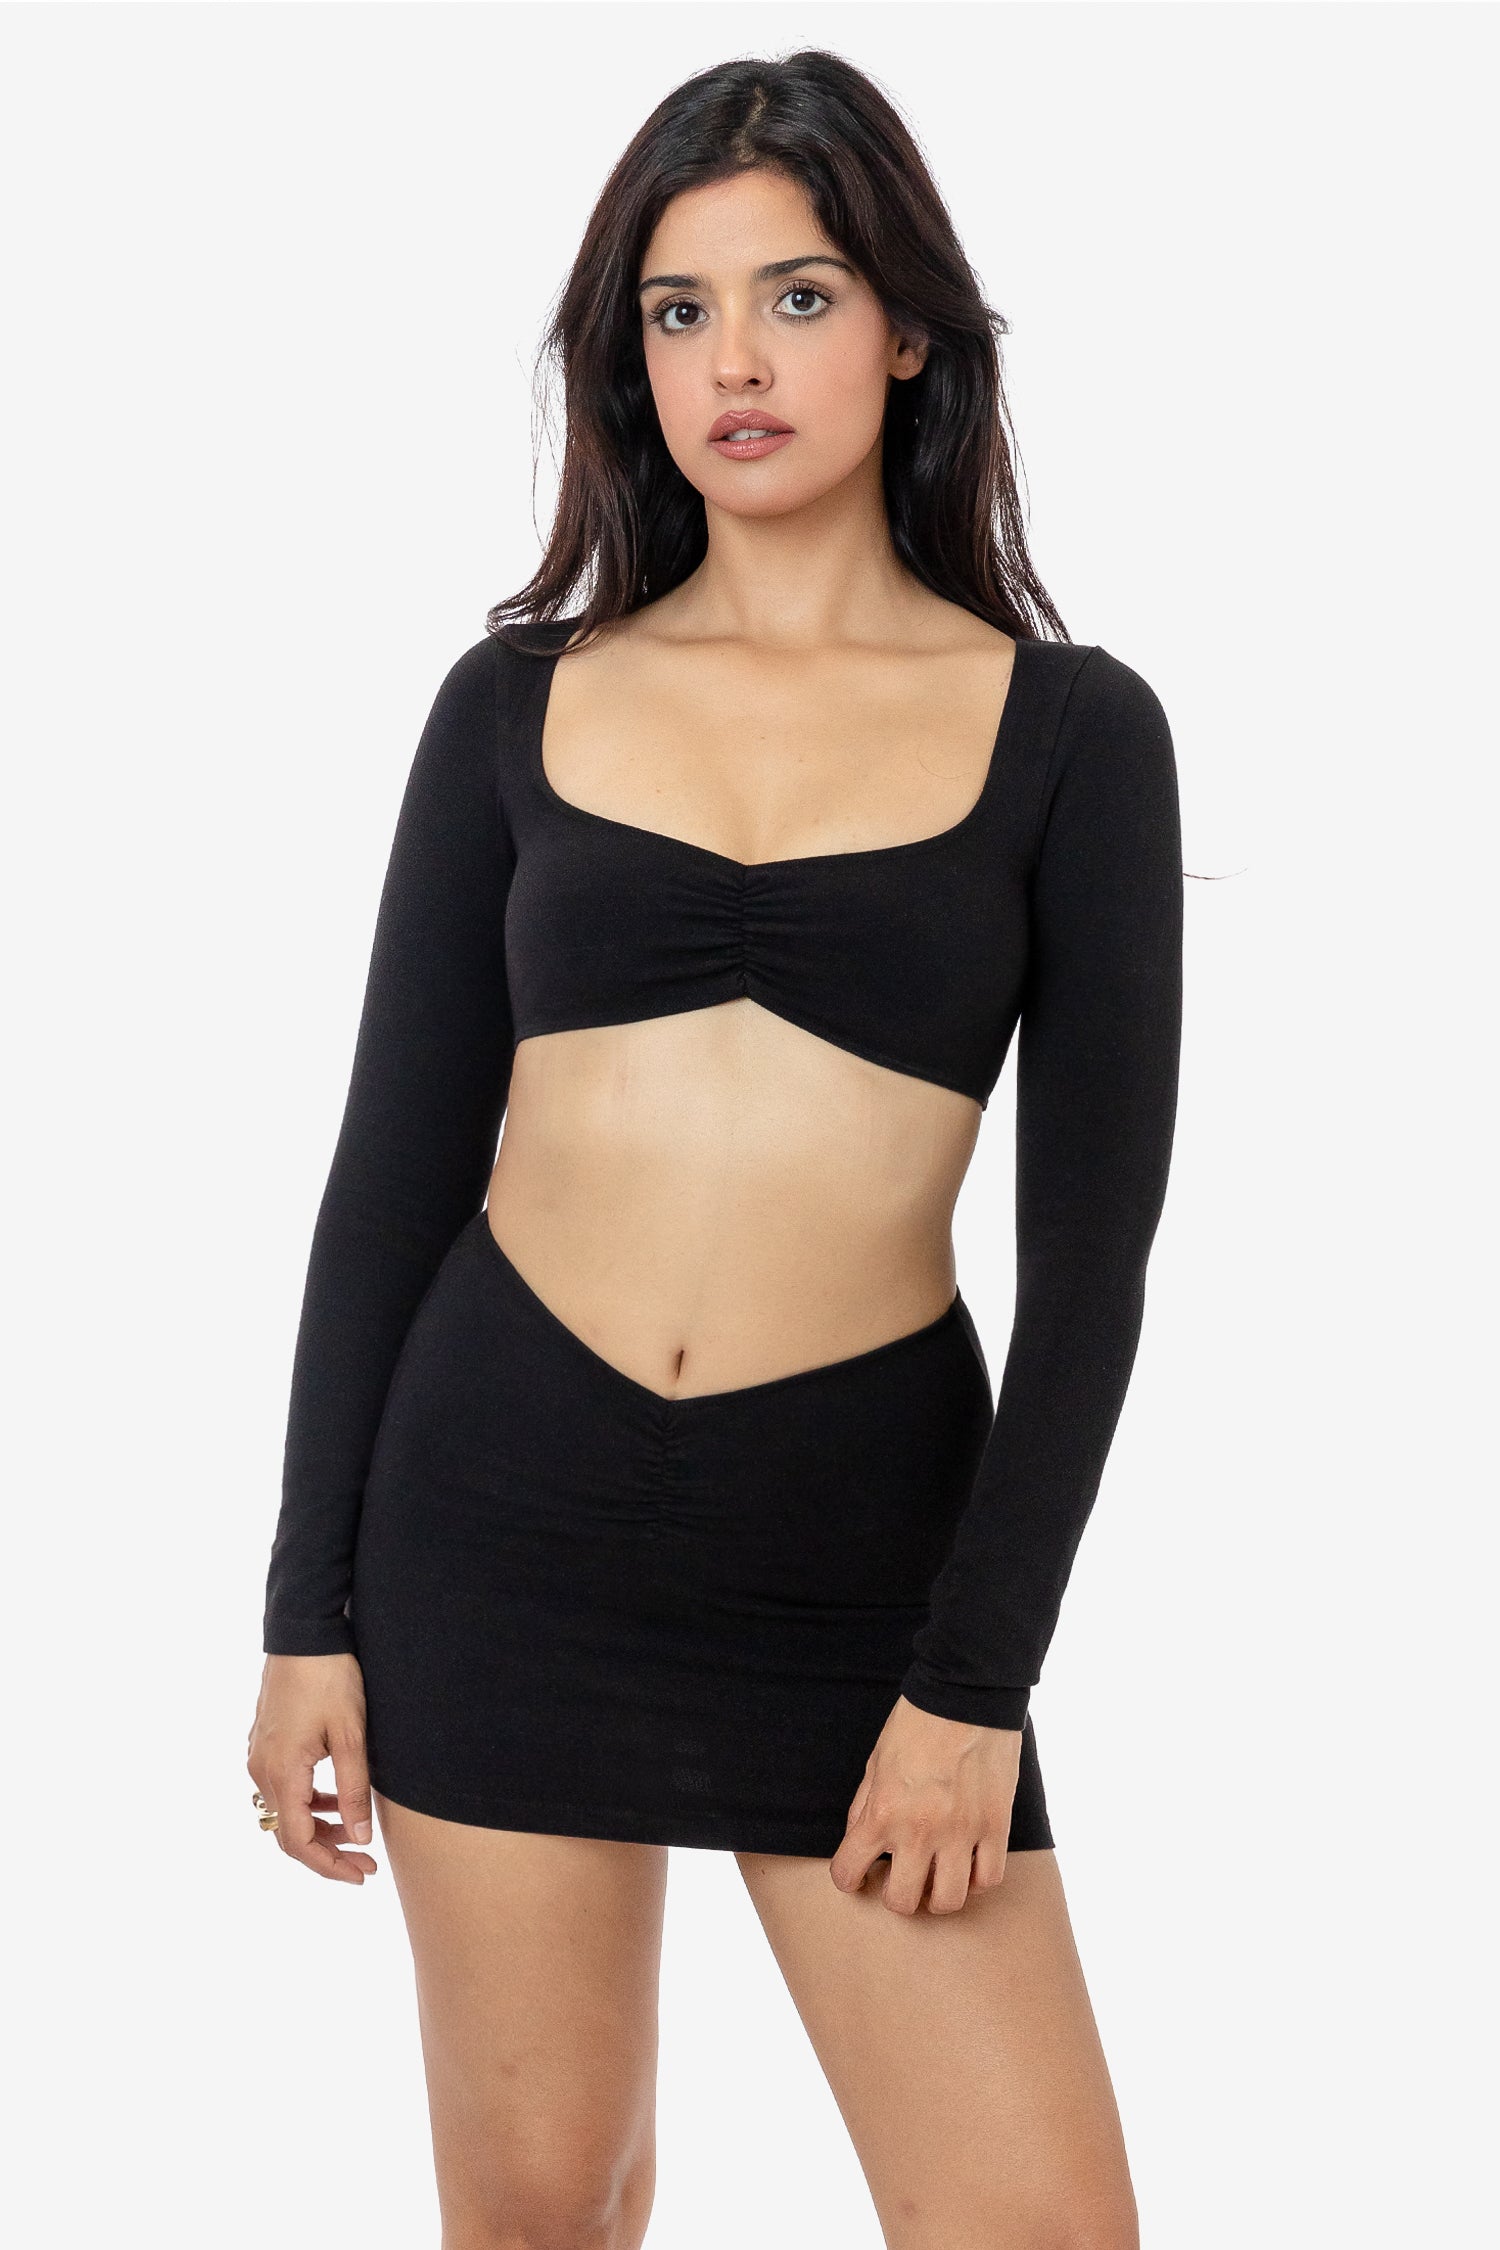 Los Angeles Apparel | Micro Mesh Long Sleeve Unitard for Women in Black, Size Xs